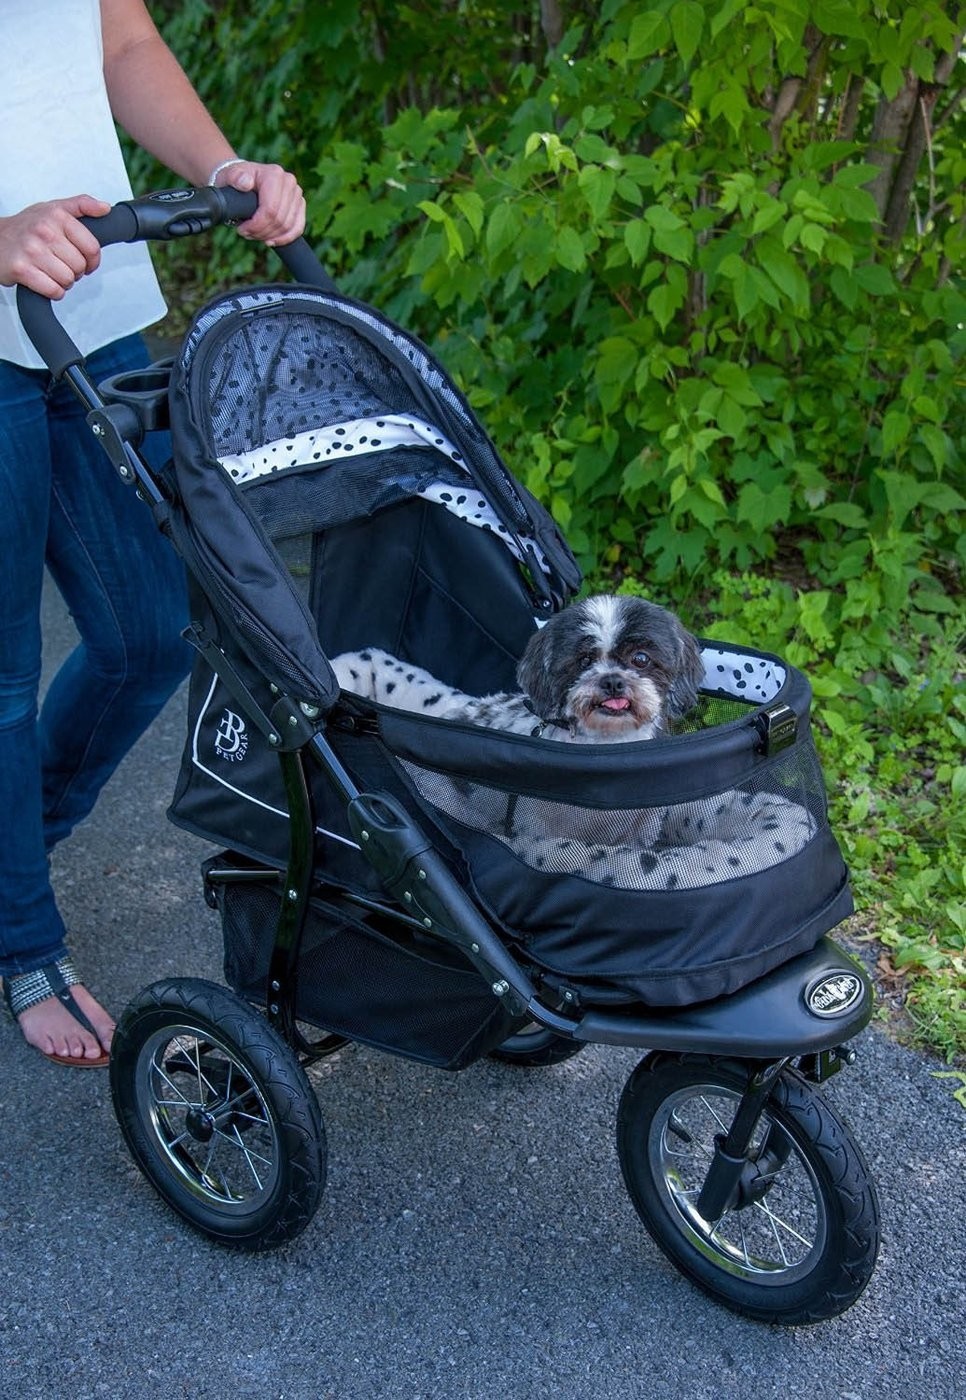 Pet gear nv pet stroller for jogging with dogs in